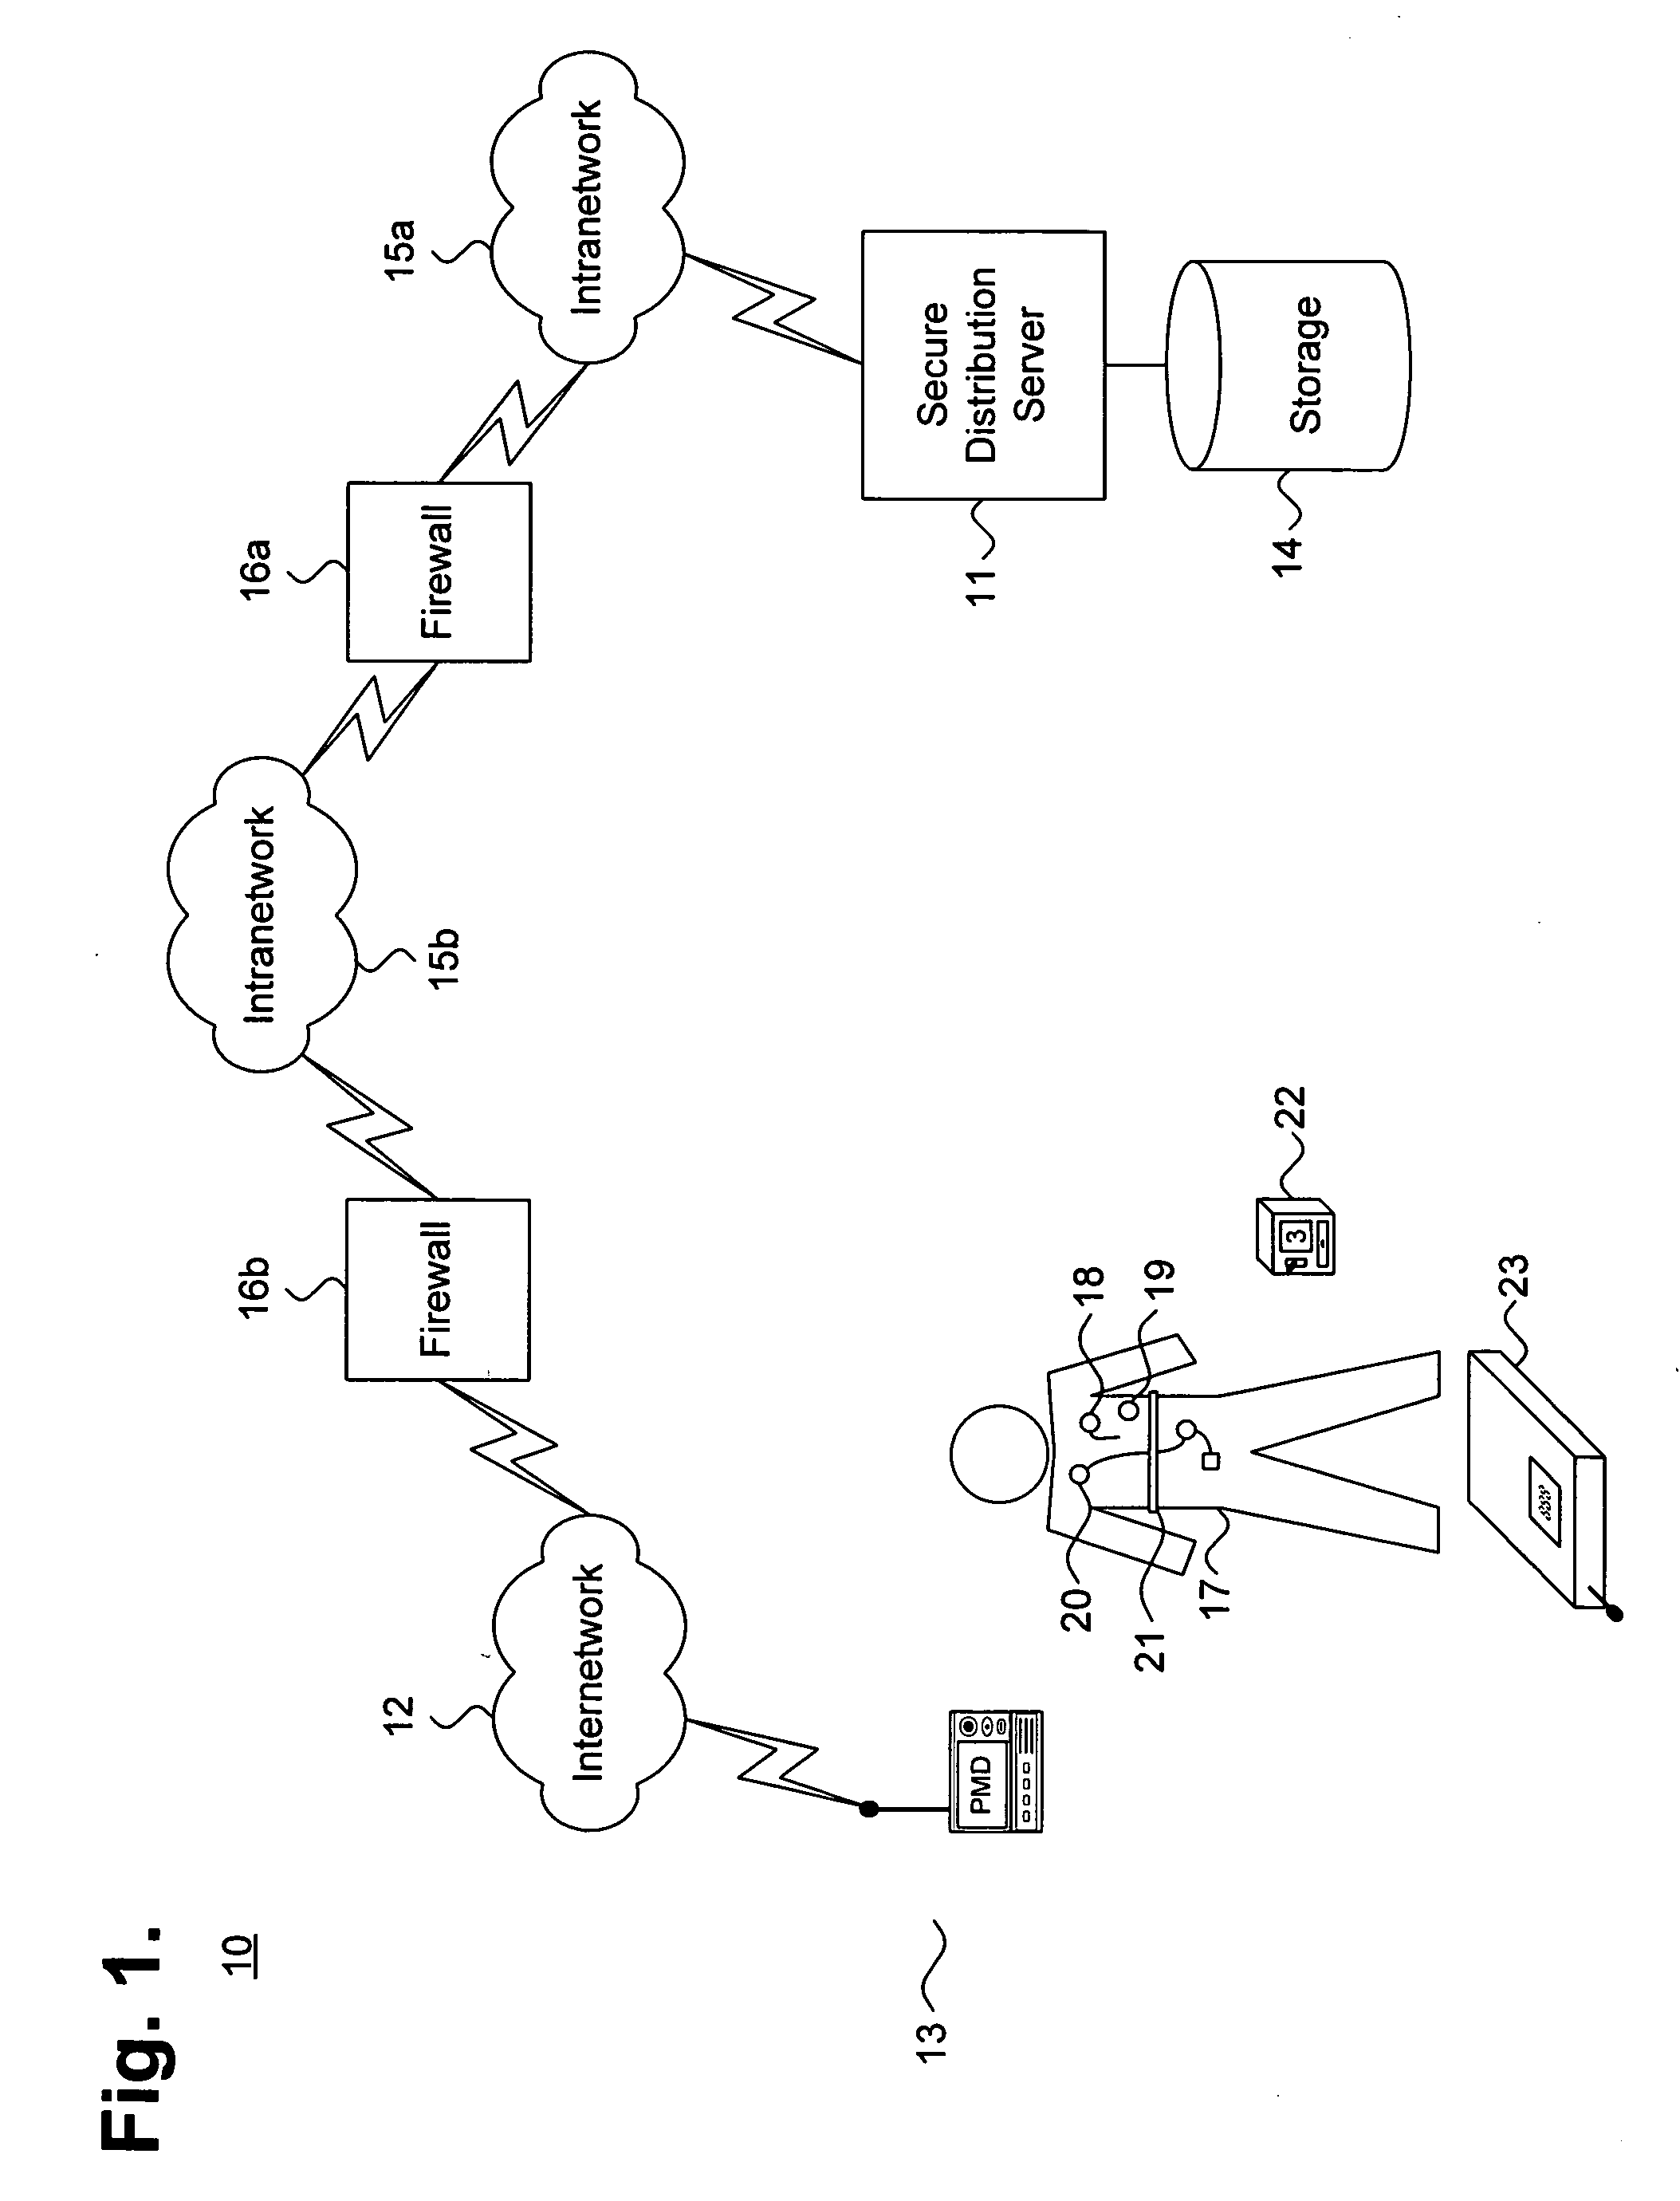 System and method for providing a secure feature set distribution infrastructure for medical device management